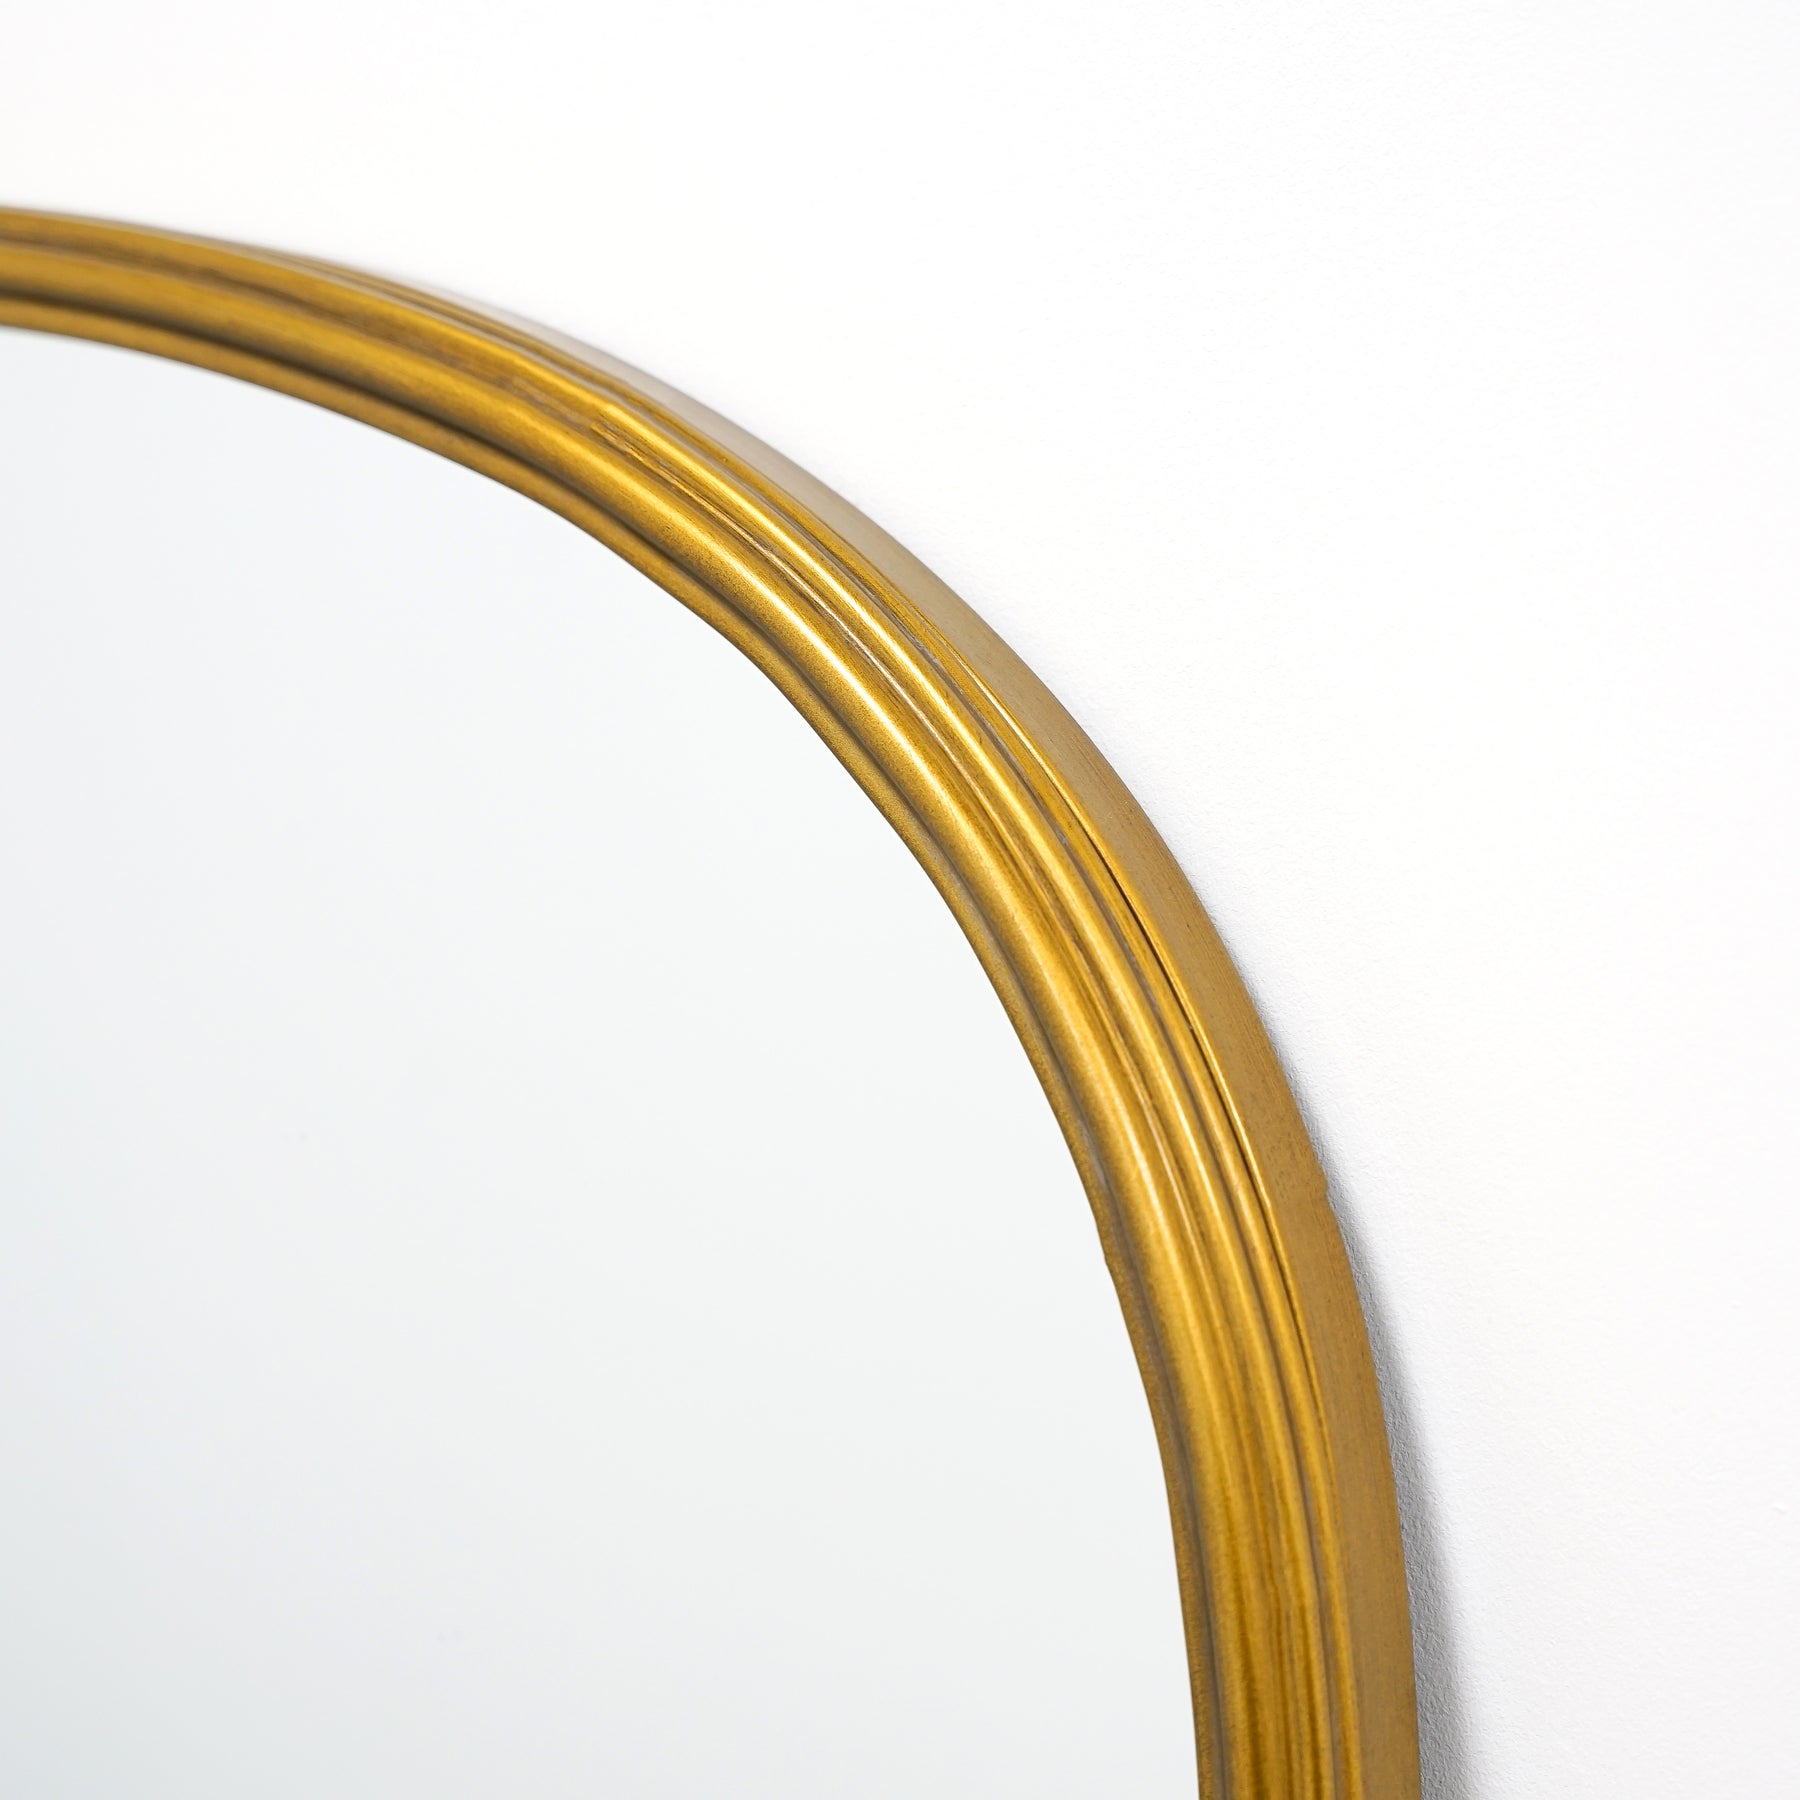 Detail shot Gold Arched Metal Overmantle Mirror arched frame